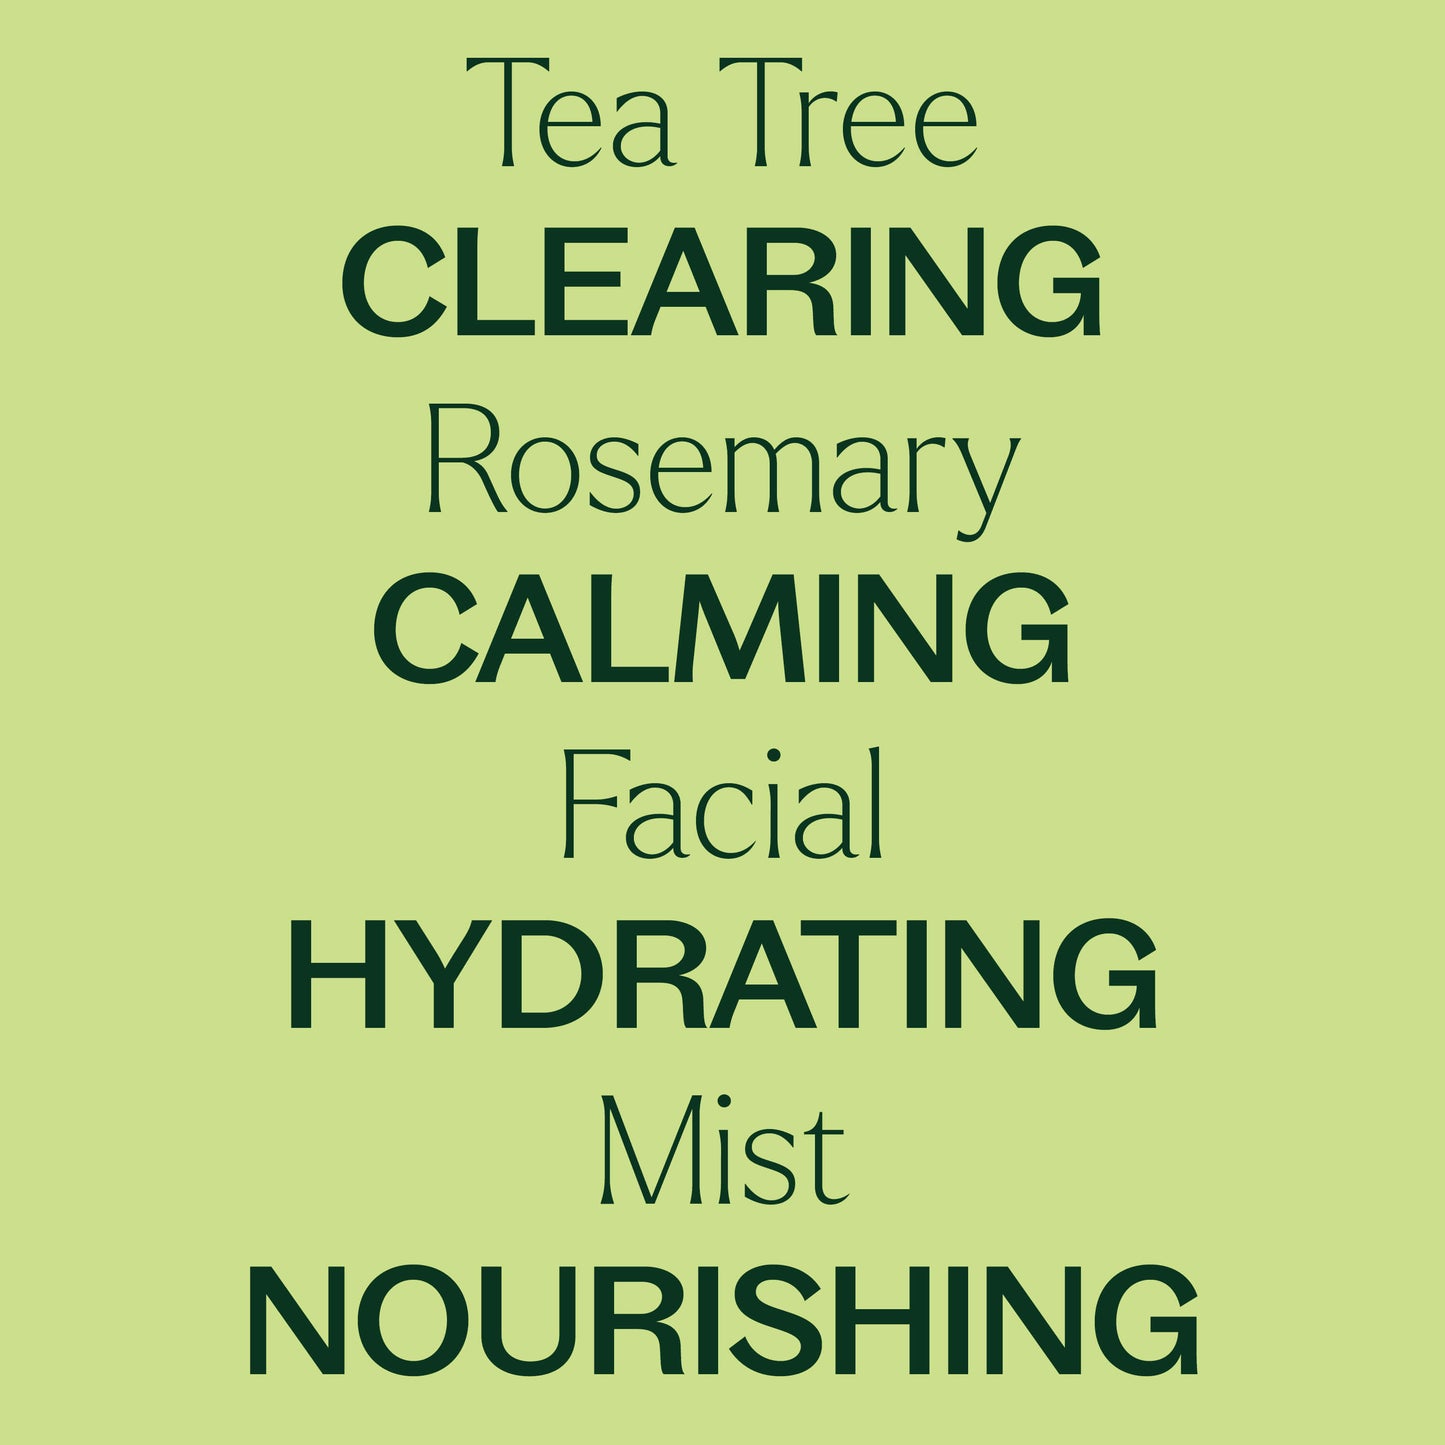 Tea Tree & Rosemary Facial Mist is clearing, calming, hydrating, nourishing